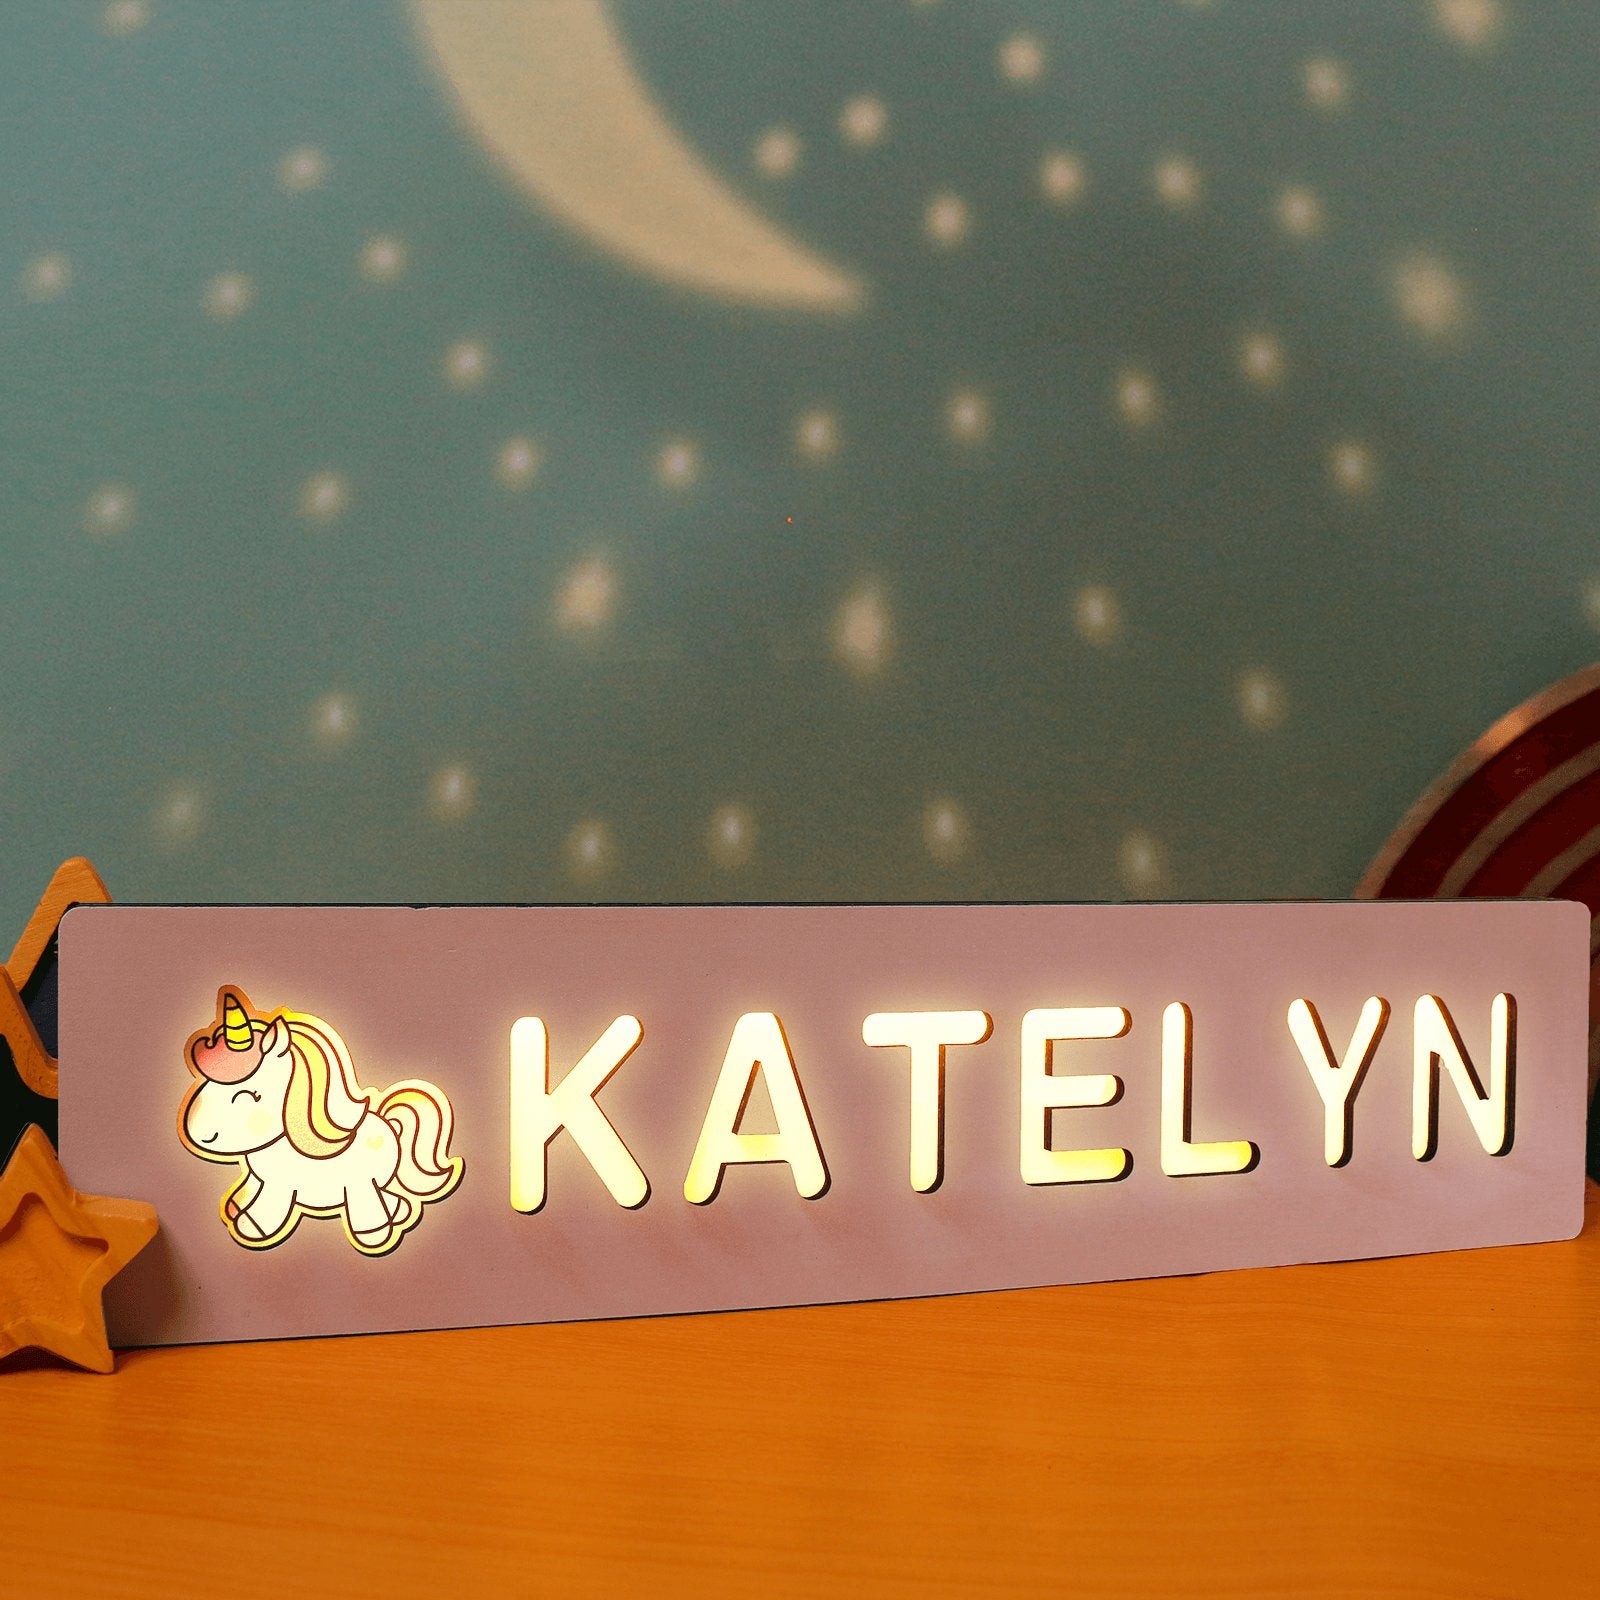 Personalized wooden letter Night Light, cute led letter light up Engraved Hollow out design, Custom Name text Letter Lamp Decor Gift for Kids Couples Friends Girlfriend Boyfriend - uniqicon